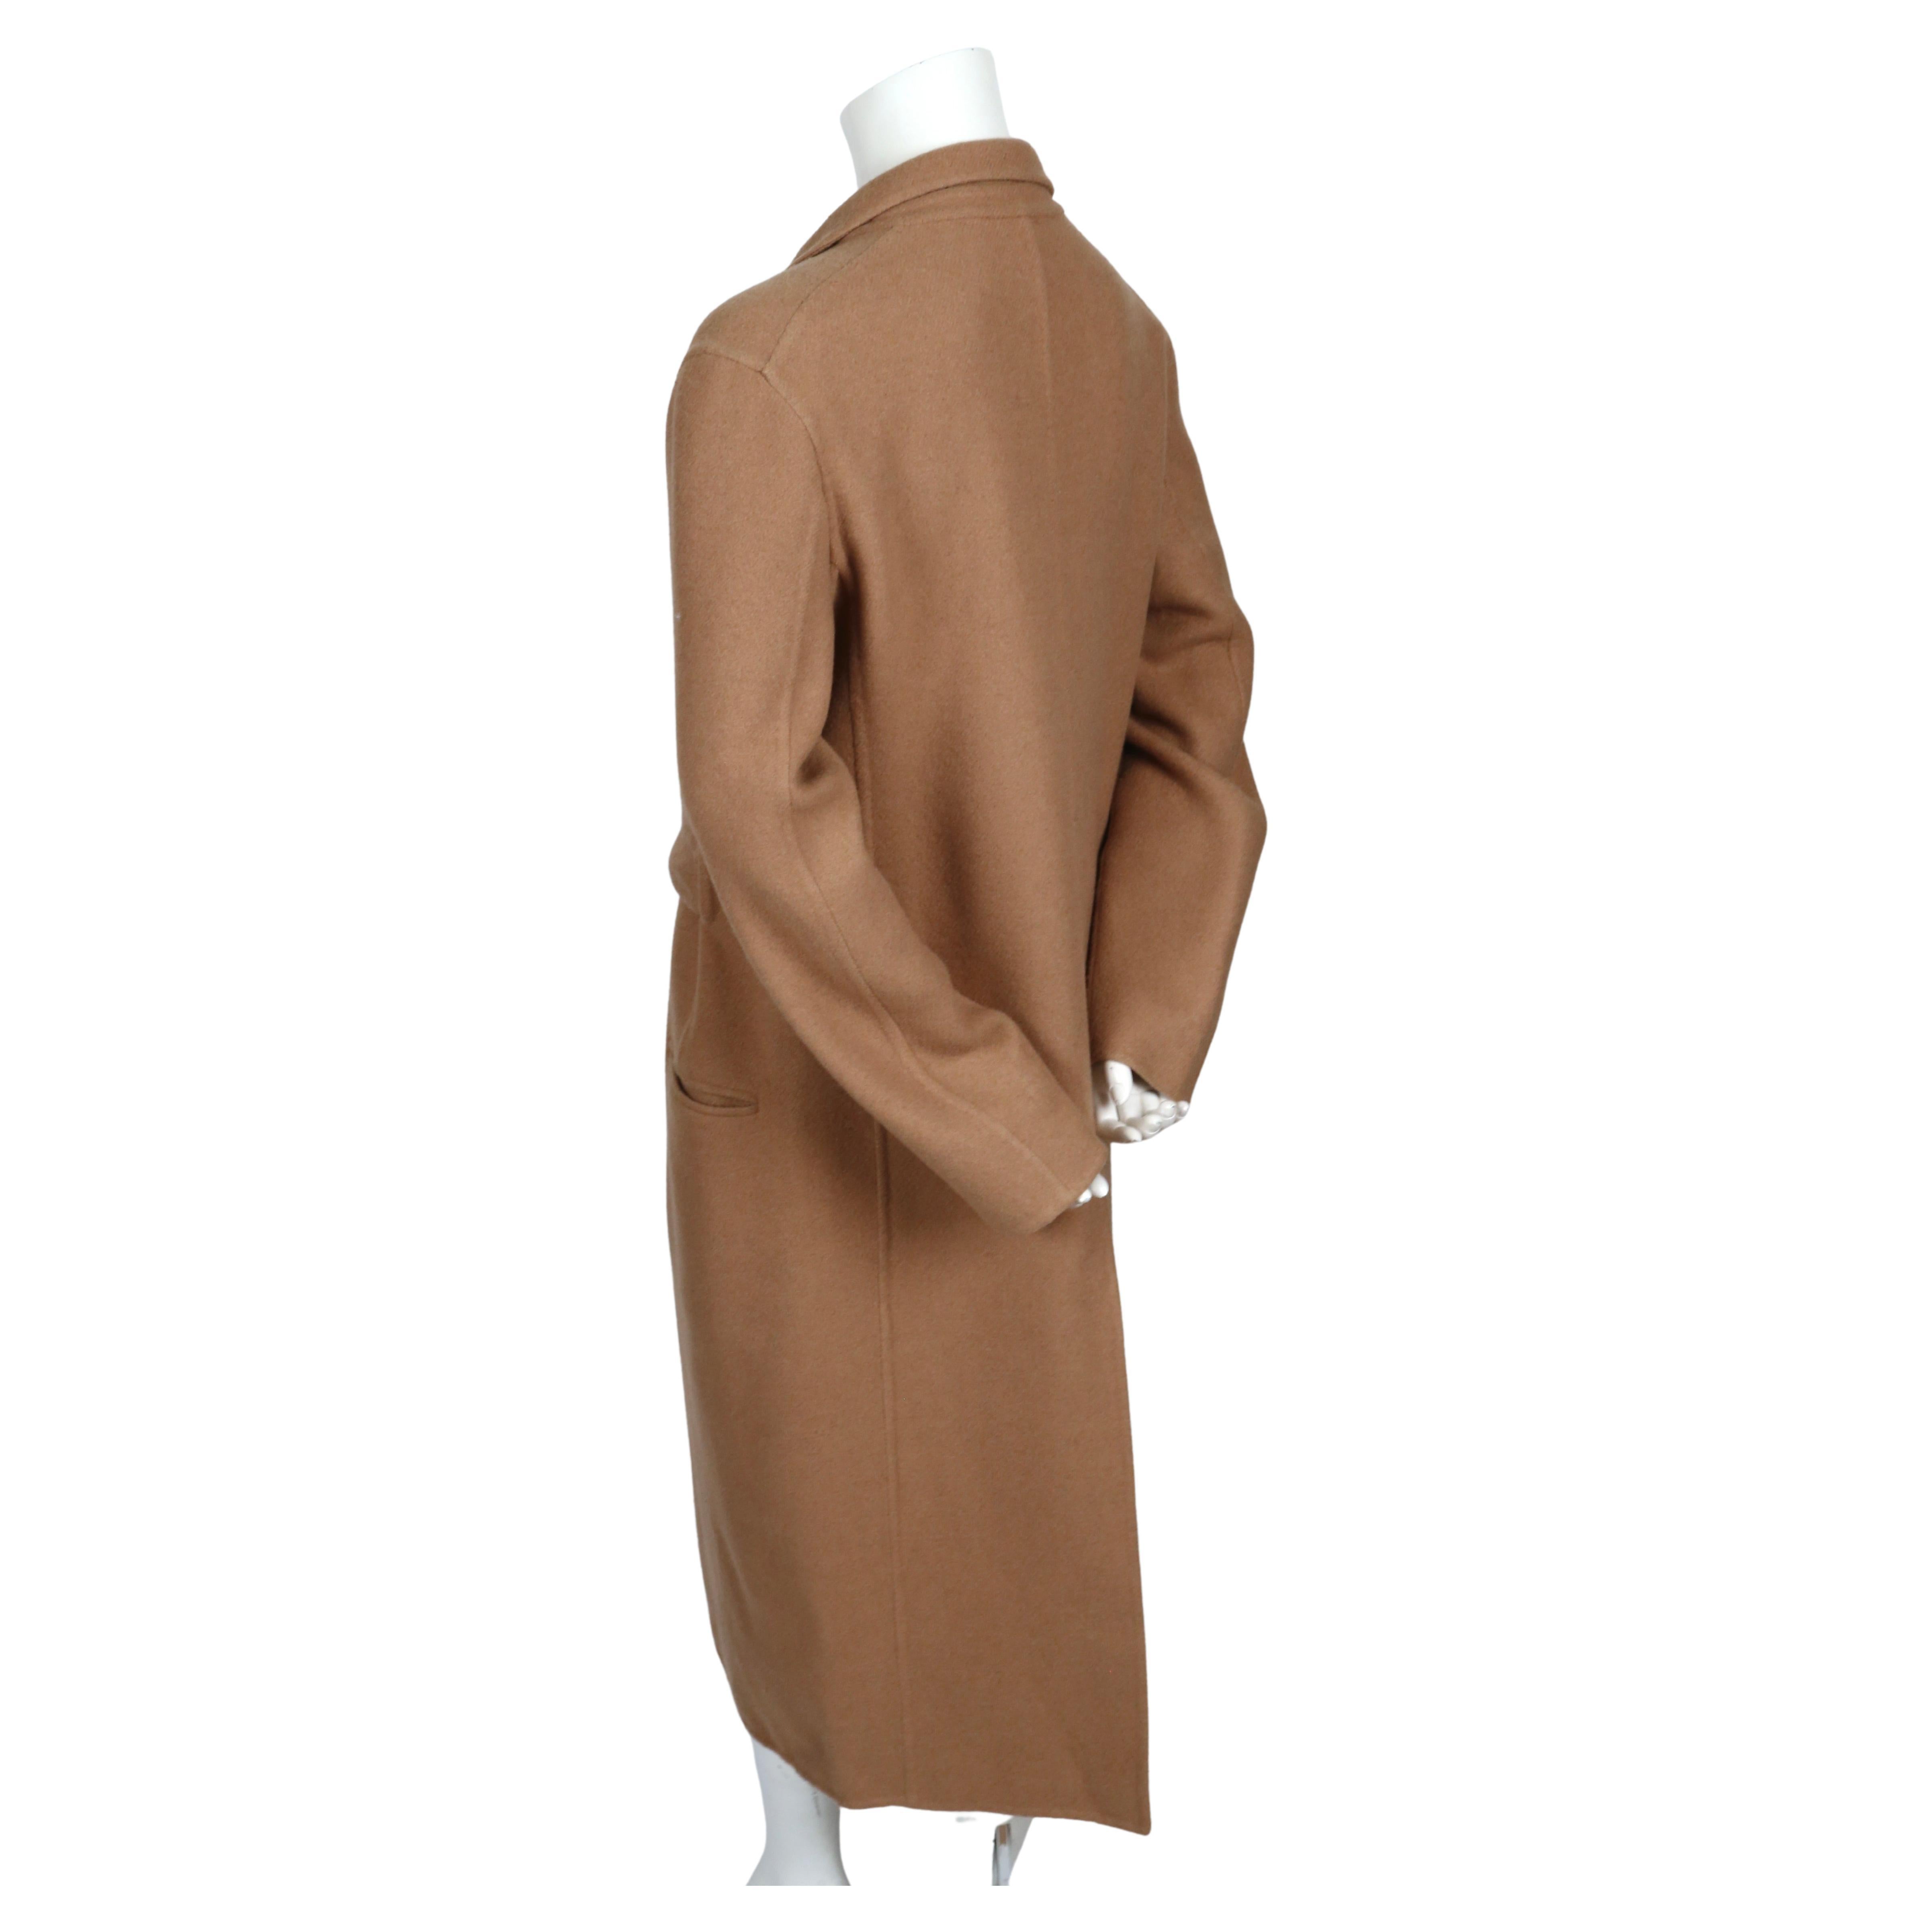 Celine by Phoebe Philo camel cashmere coat with belt   In New Condition For Sale In San Fransisco, CA